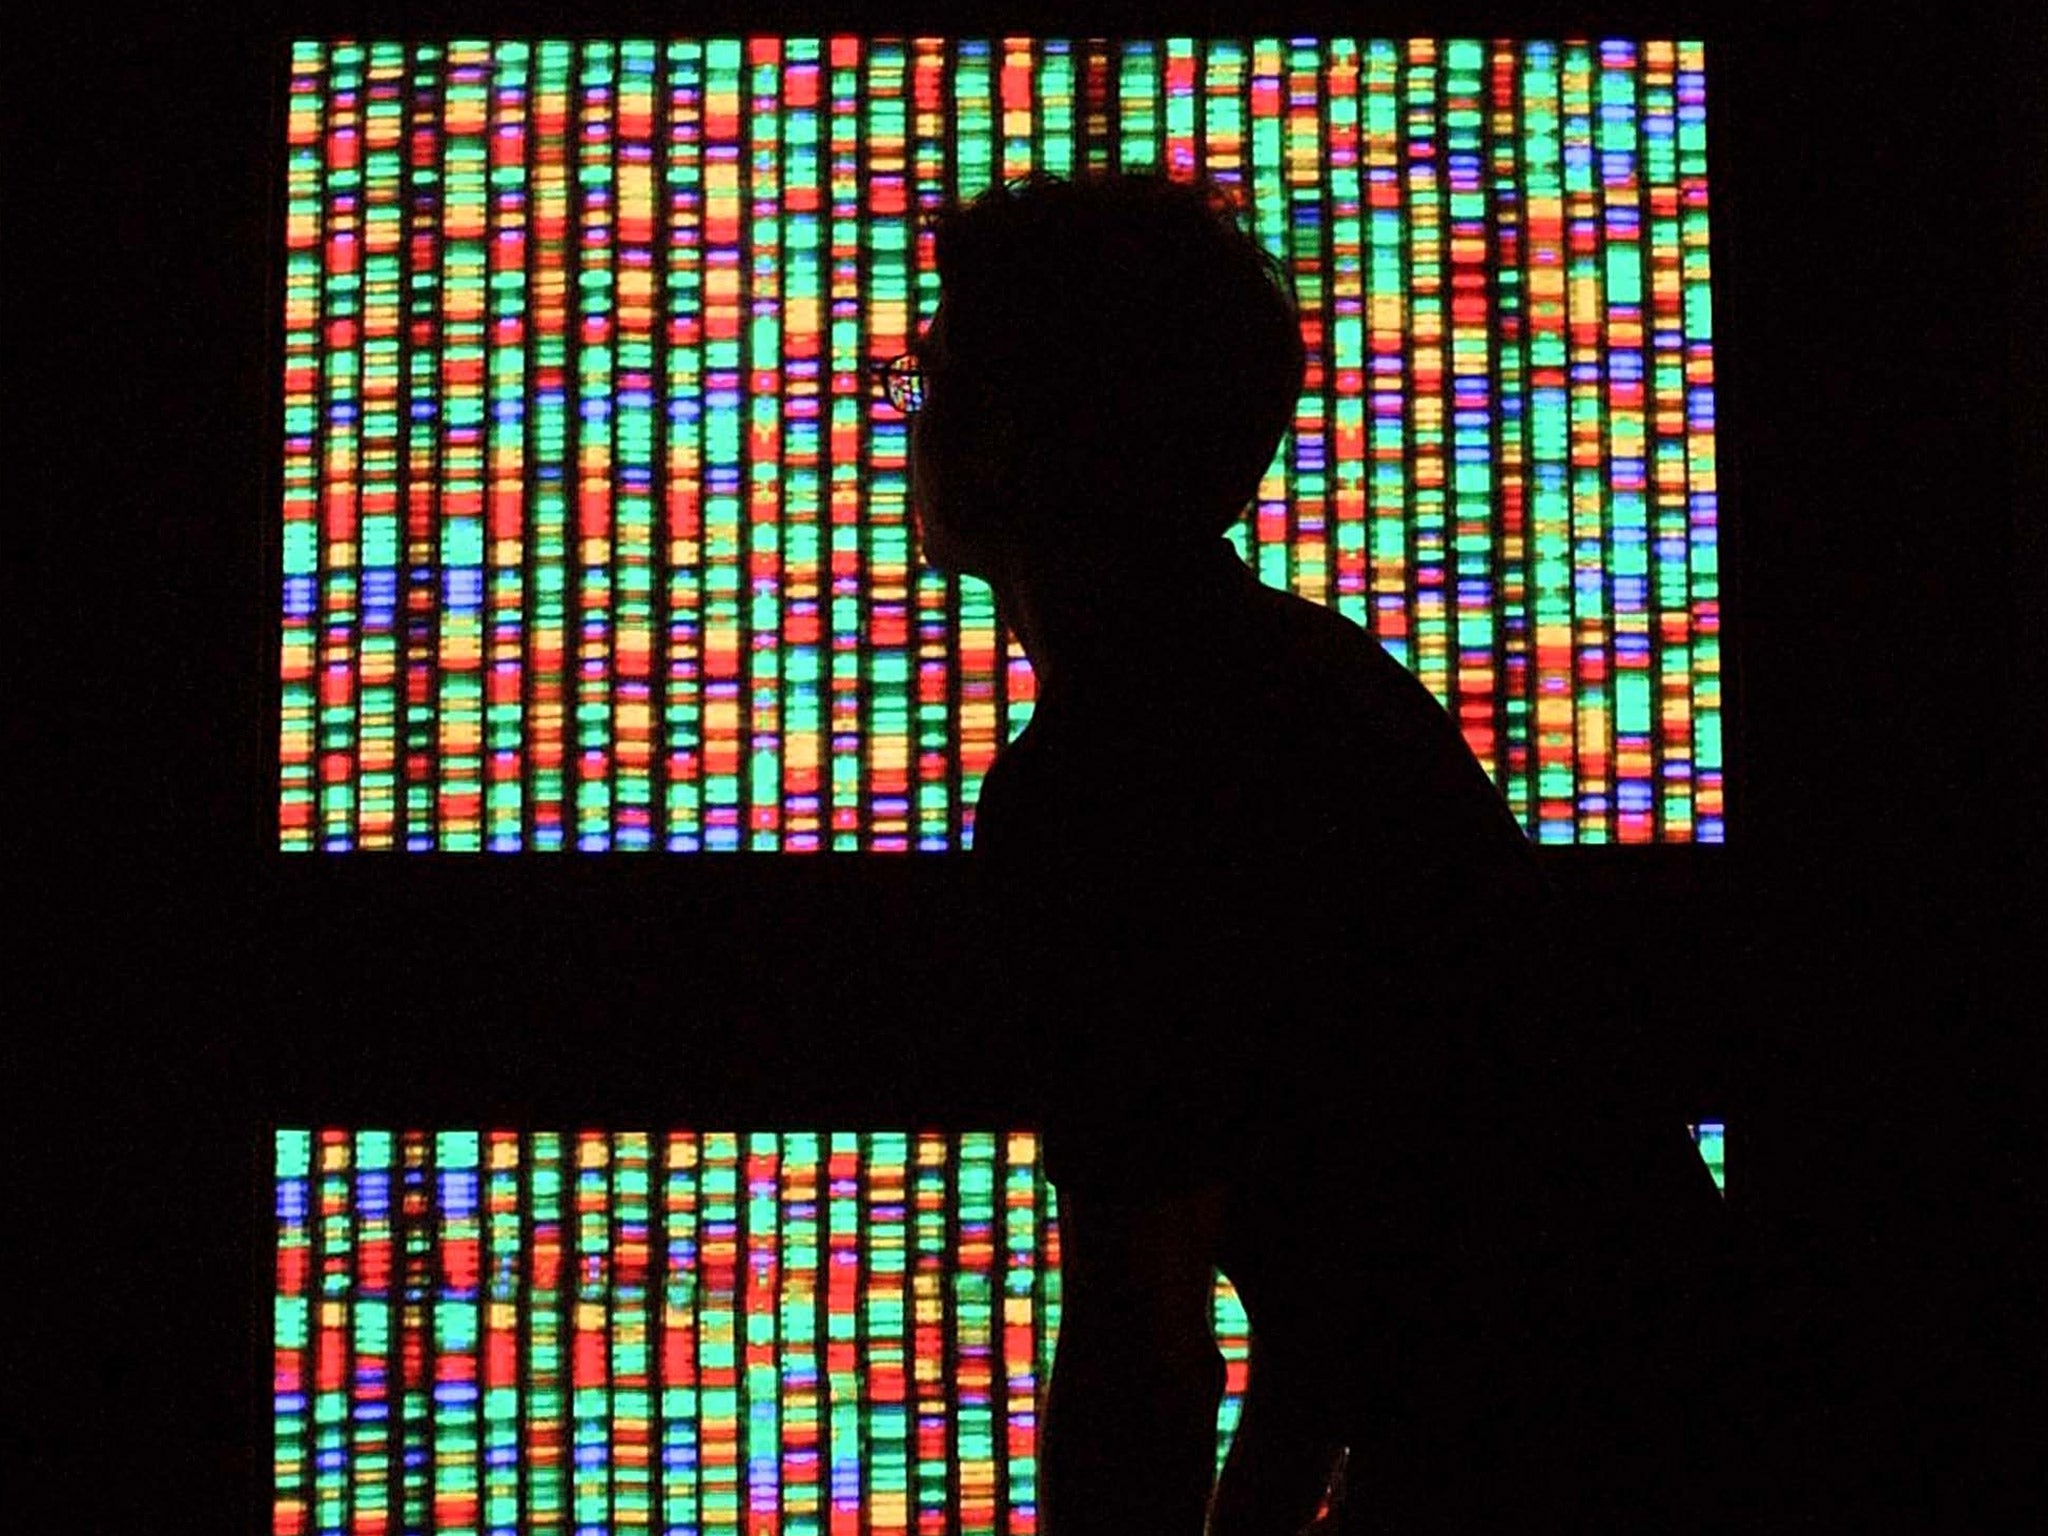 The genome research is the largest project of its kind